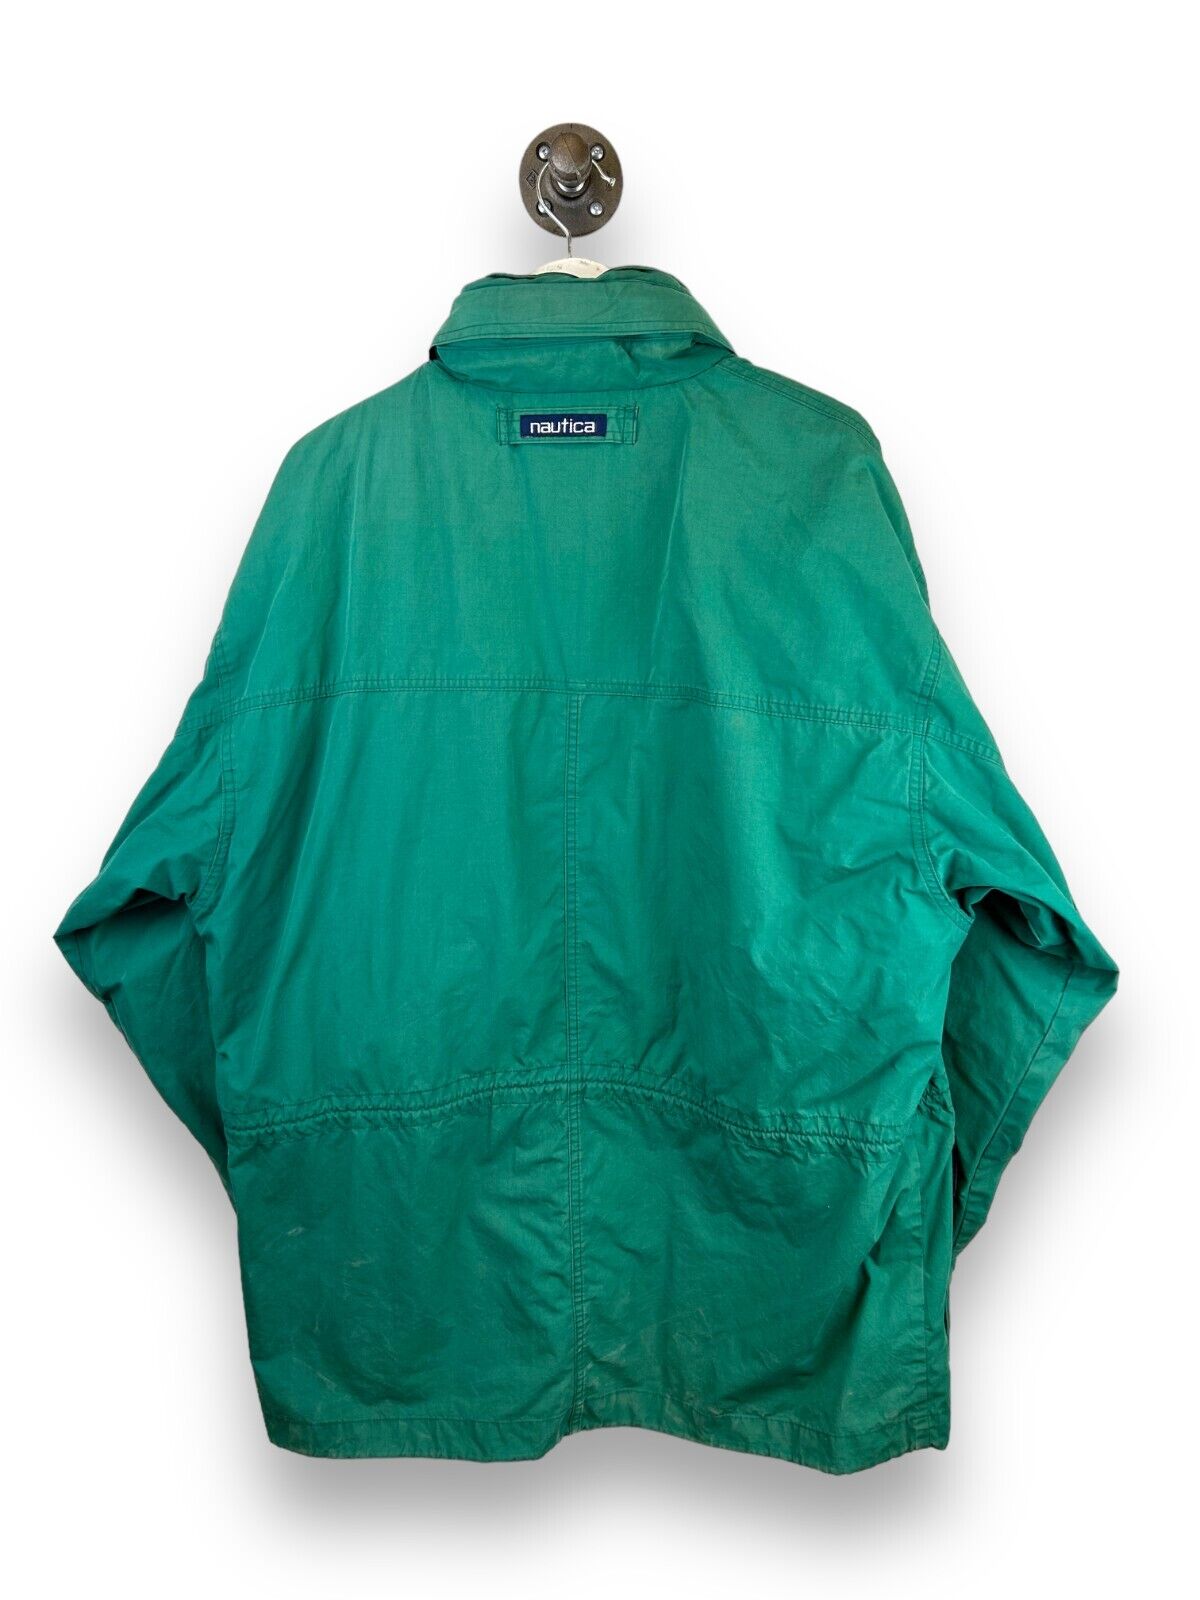 Vintage 90s Nautica Cinched Light Long Barn Jacket Size Large Green